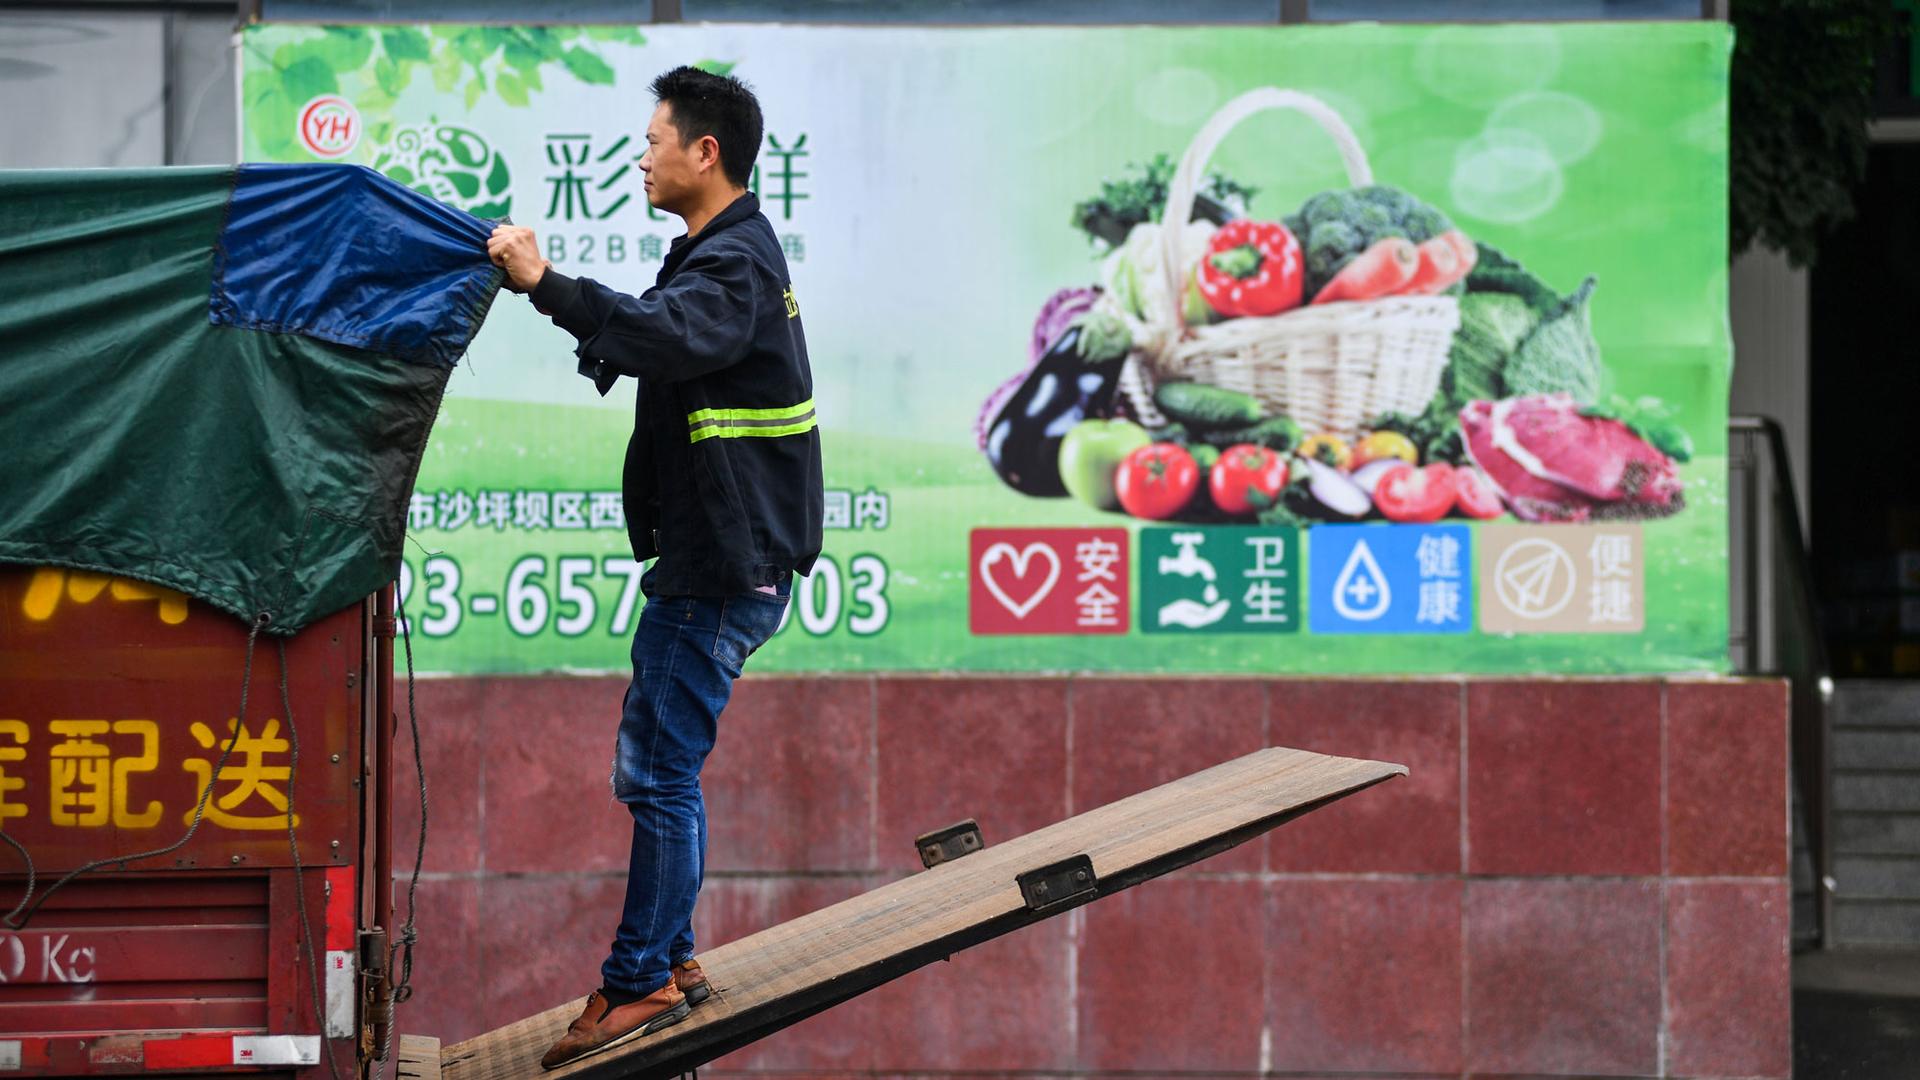 A worker wearing jeans and a reflective jacket adjusts a tarp on the back of a truck outside a warehouse of Yonghui Superstores in Chongqing, China.